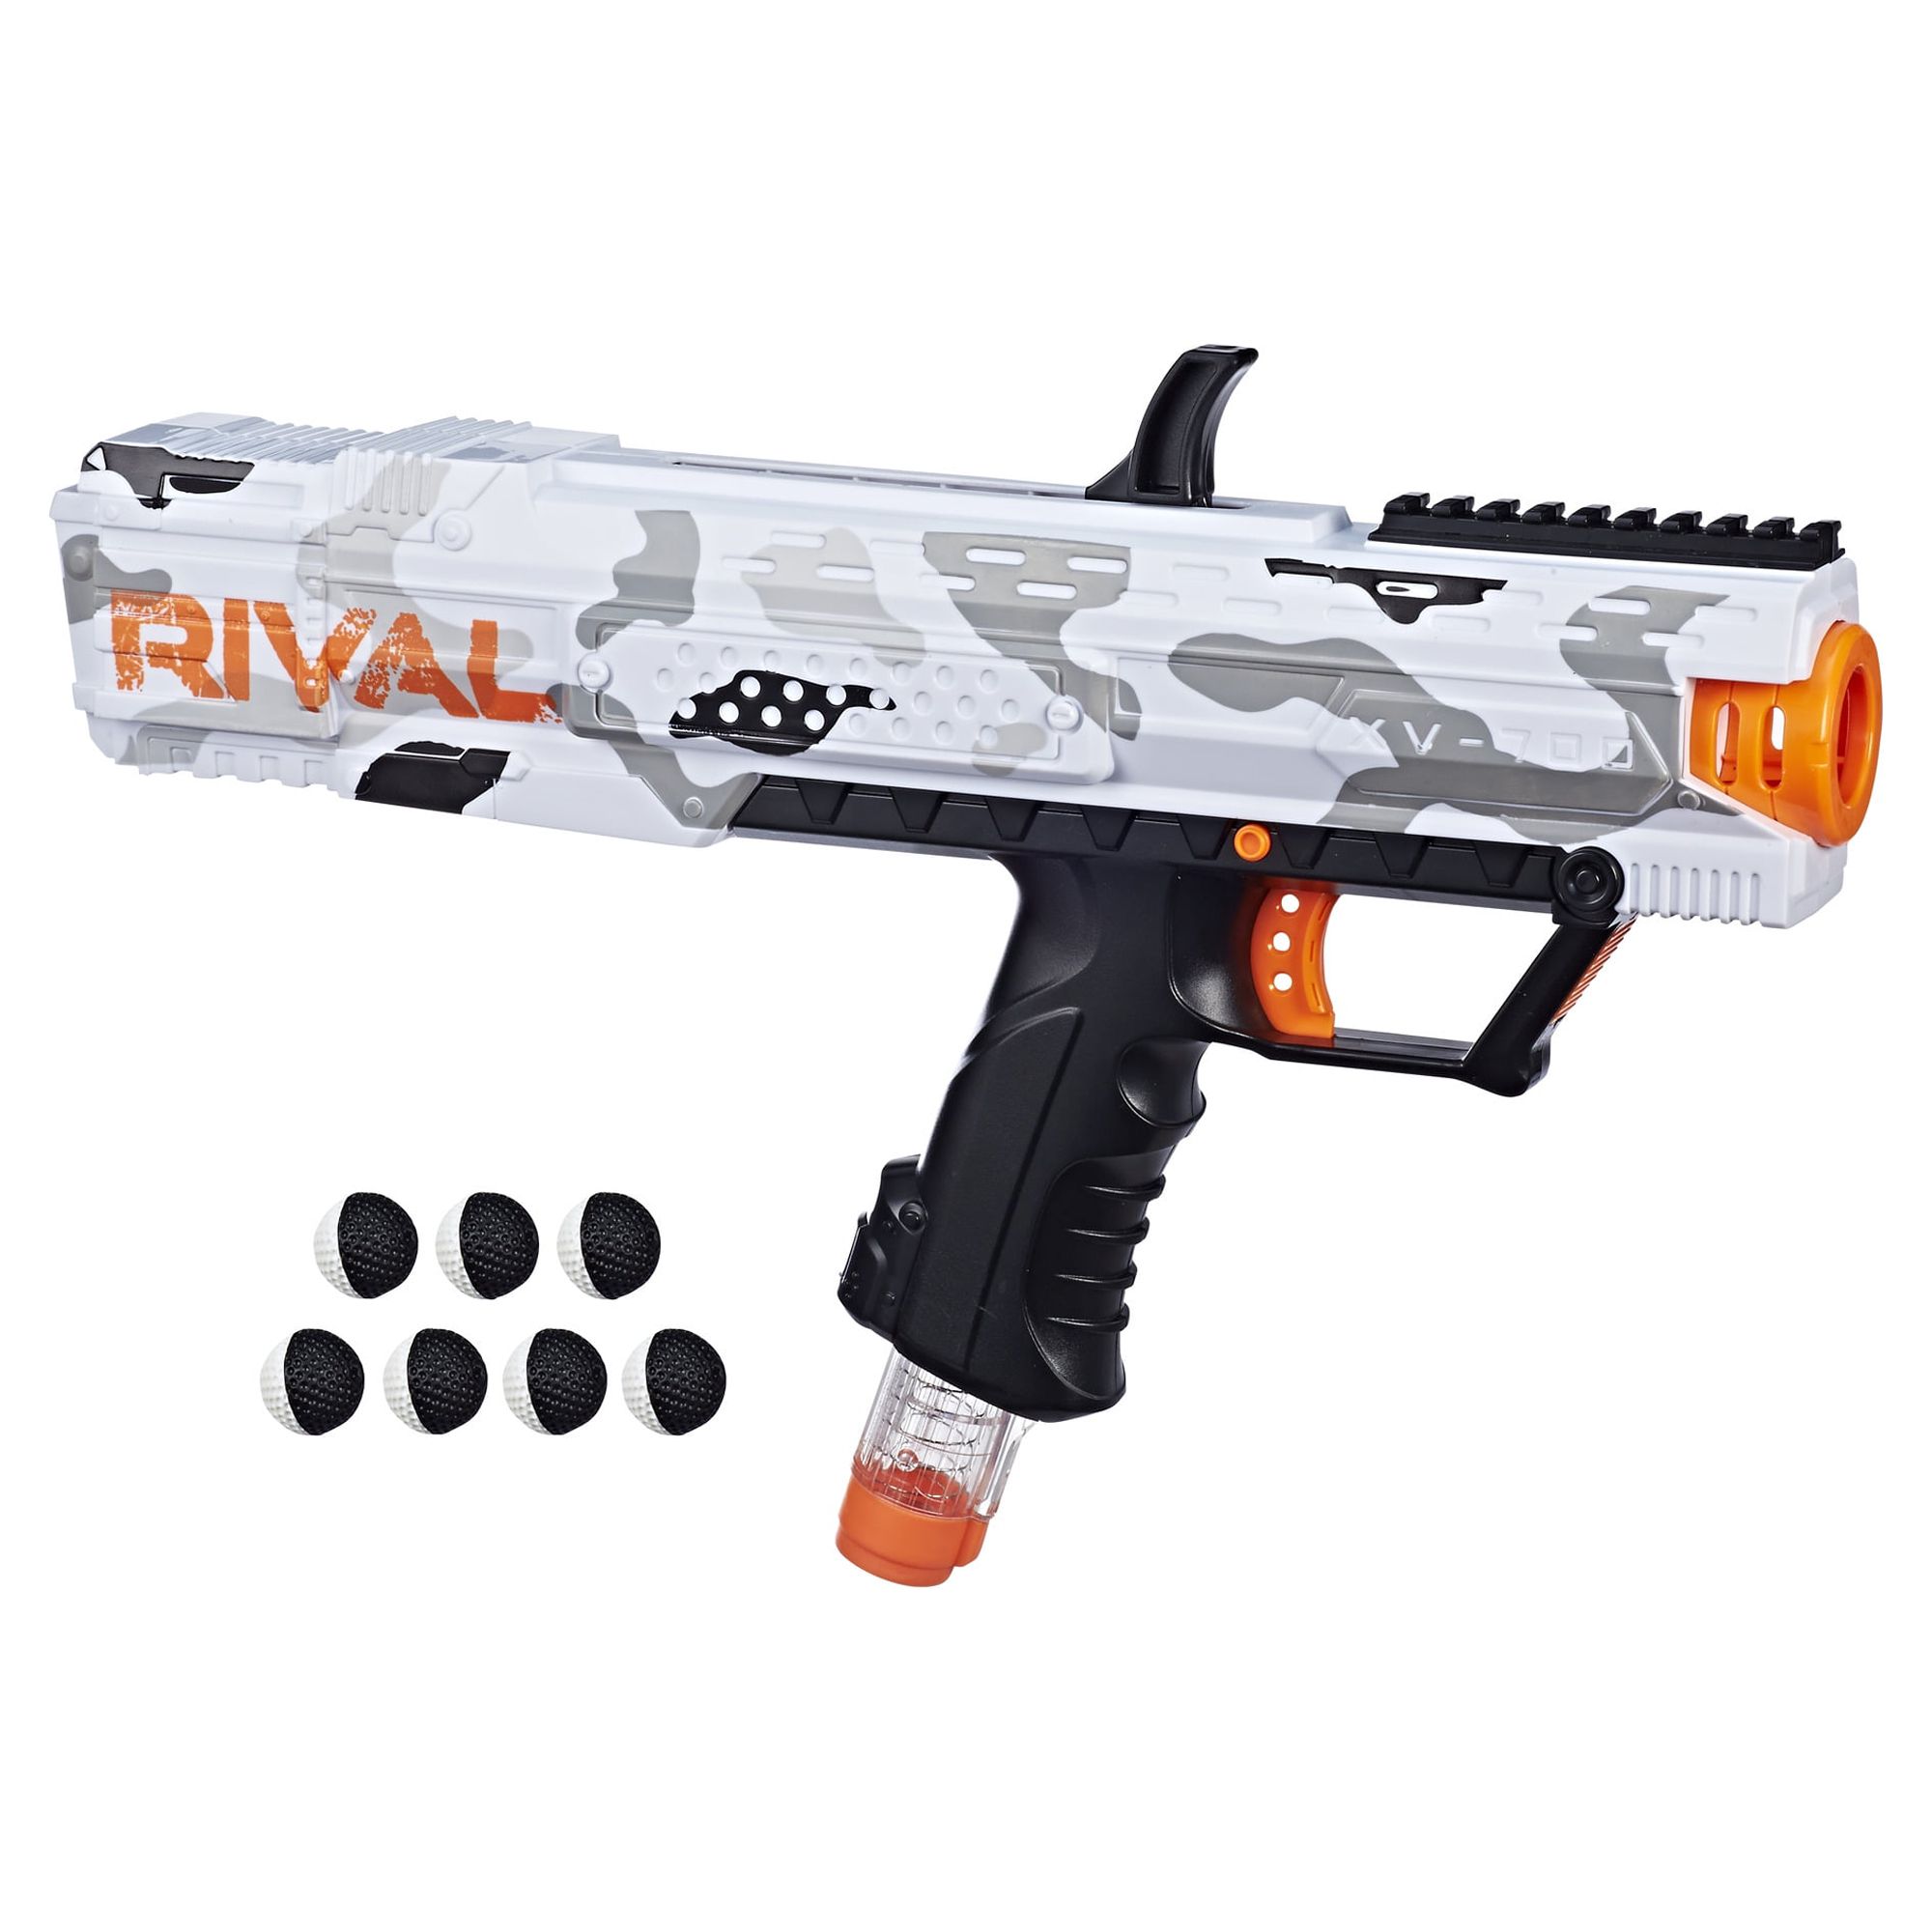 Nerf Rival Apollo XV-700 Camo Series Toy Blaster with 7 Ball Dart Rounds for Ages 14 and Up - image 1 of 12